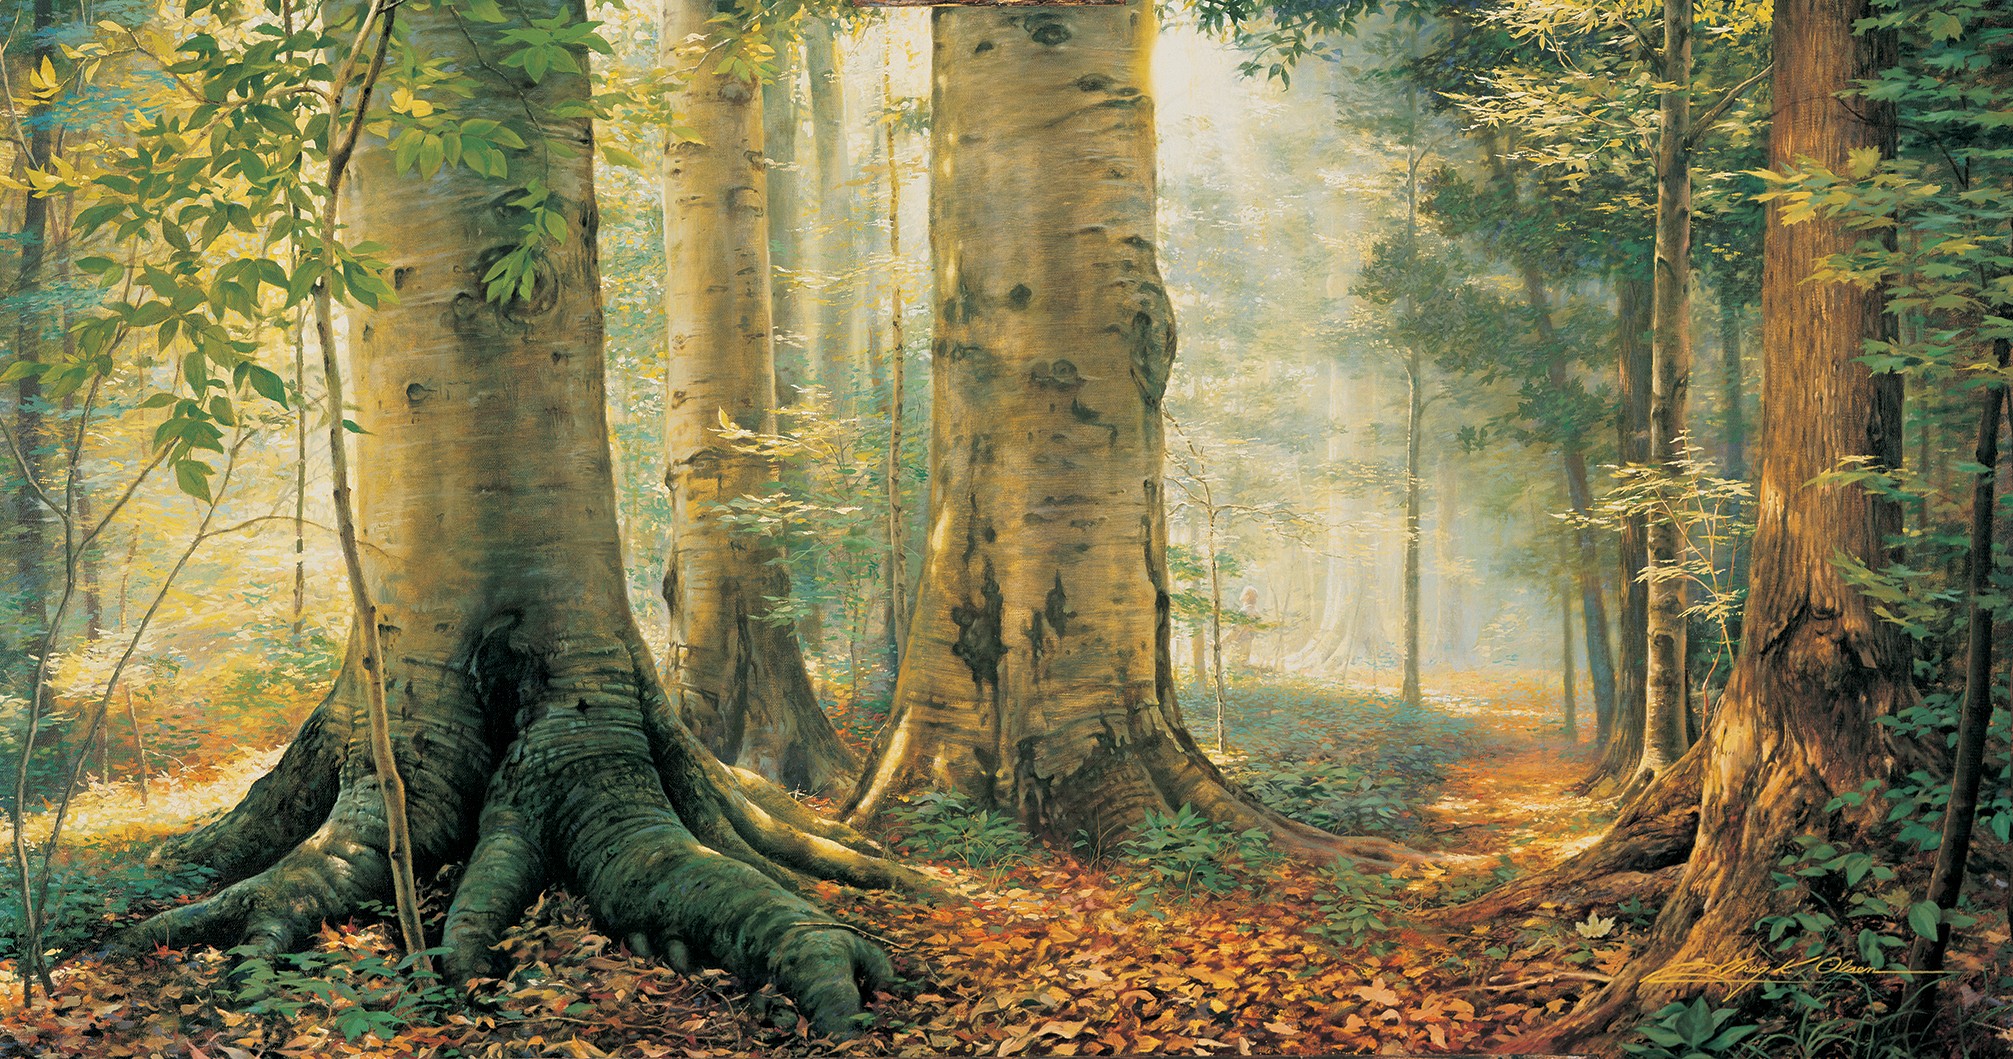 Joseph Smith kneels in Sacred Grove with light streaming through the trees.